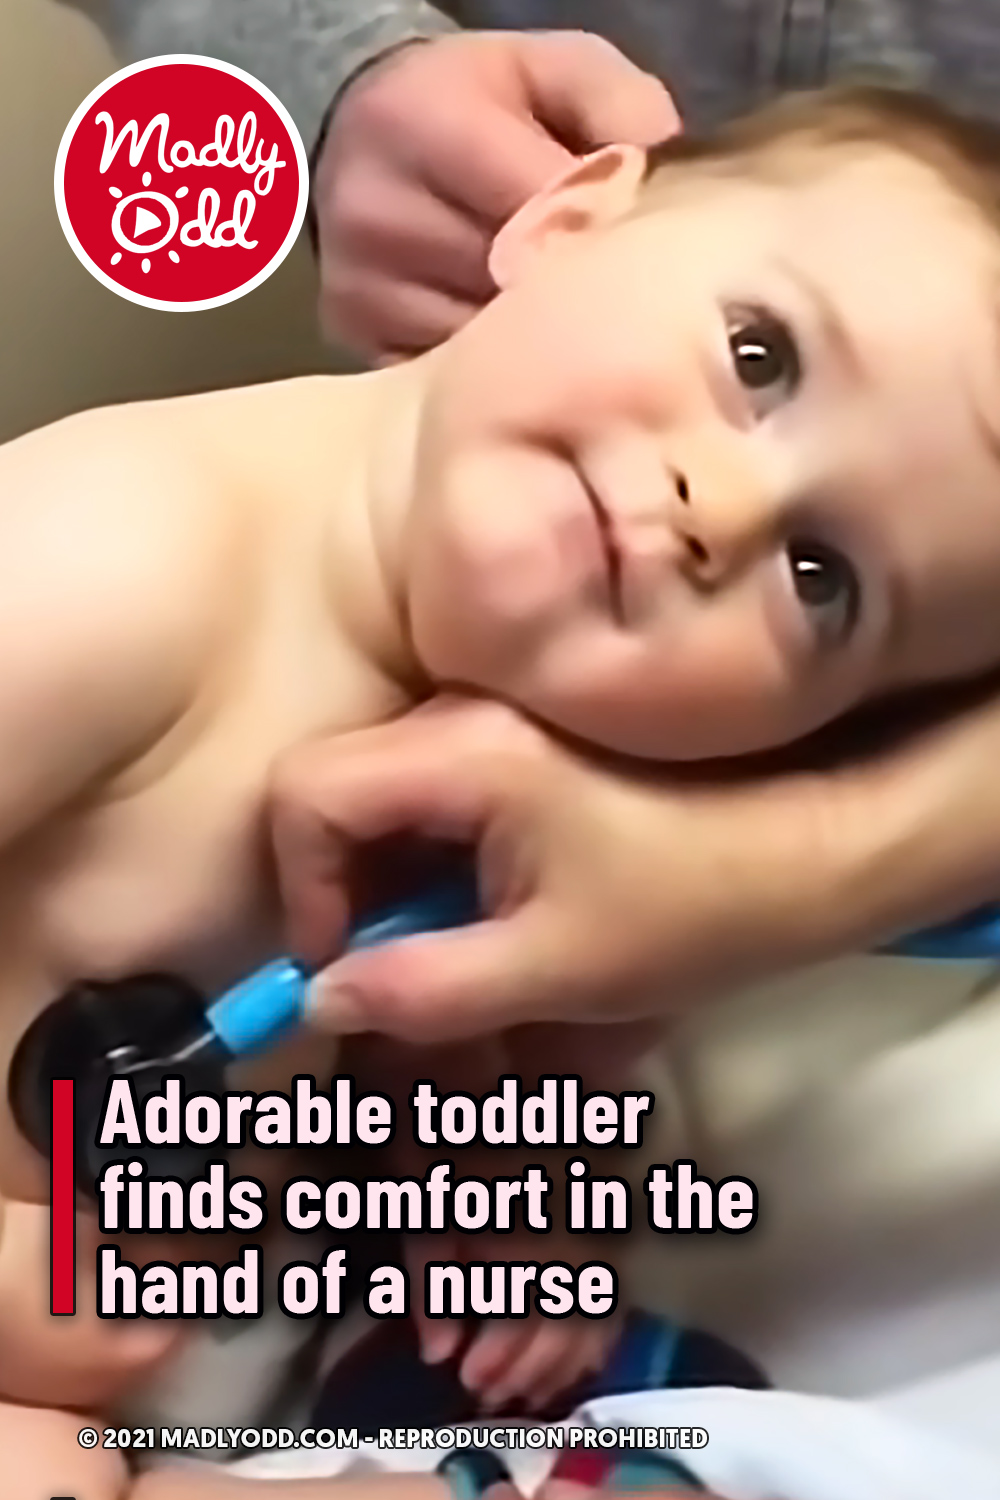 Adorable toddler finds comfort in the hand of a nurse